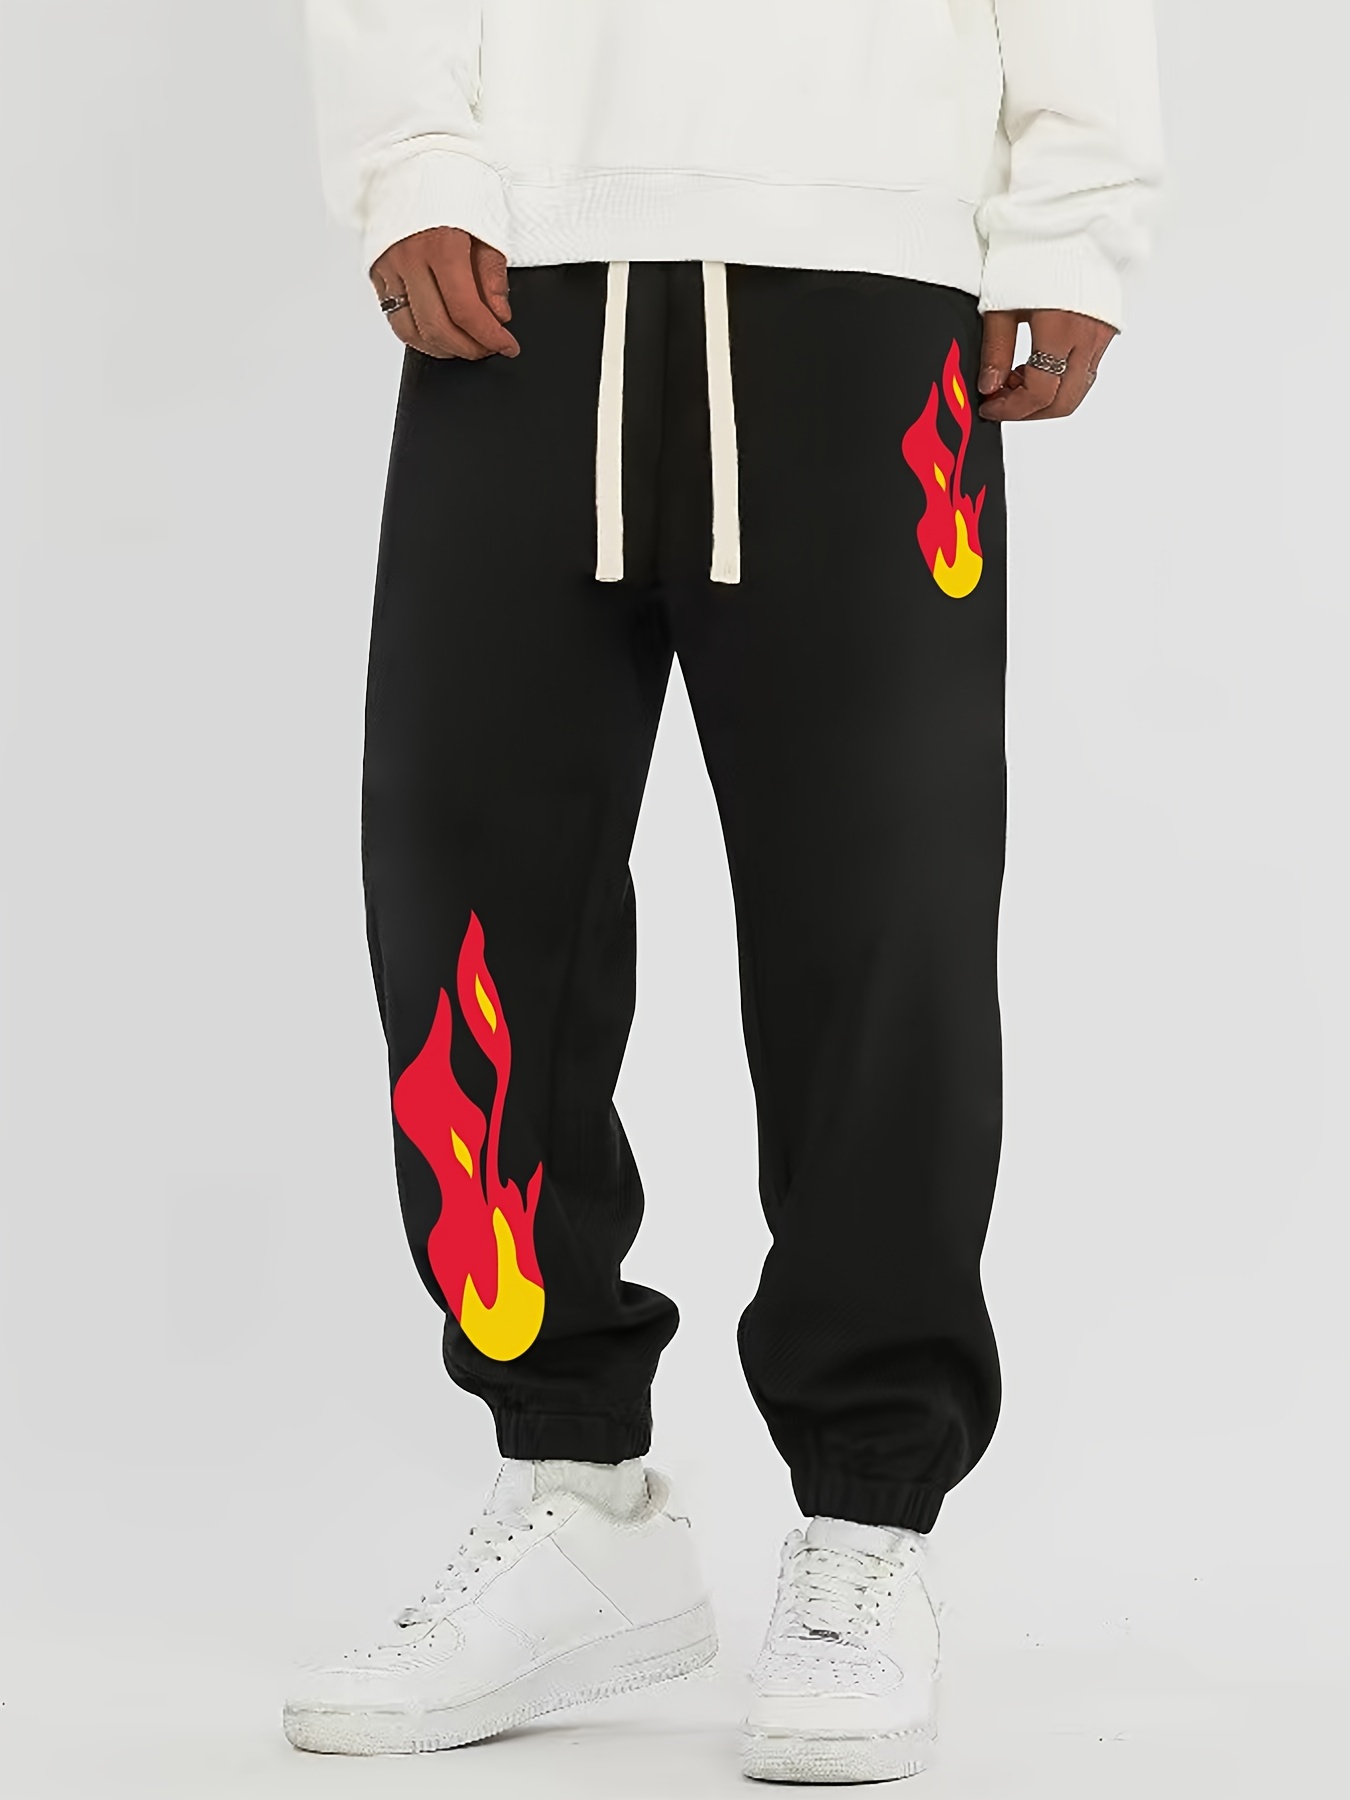 FLAME SWEATPANTS WHITE & RED